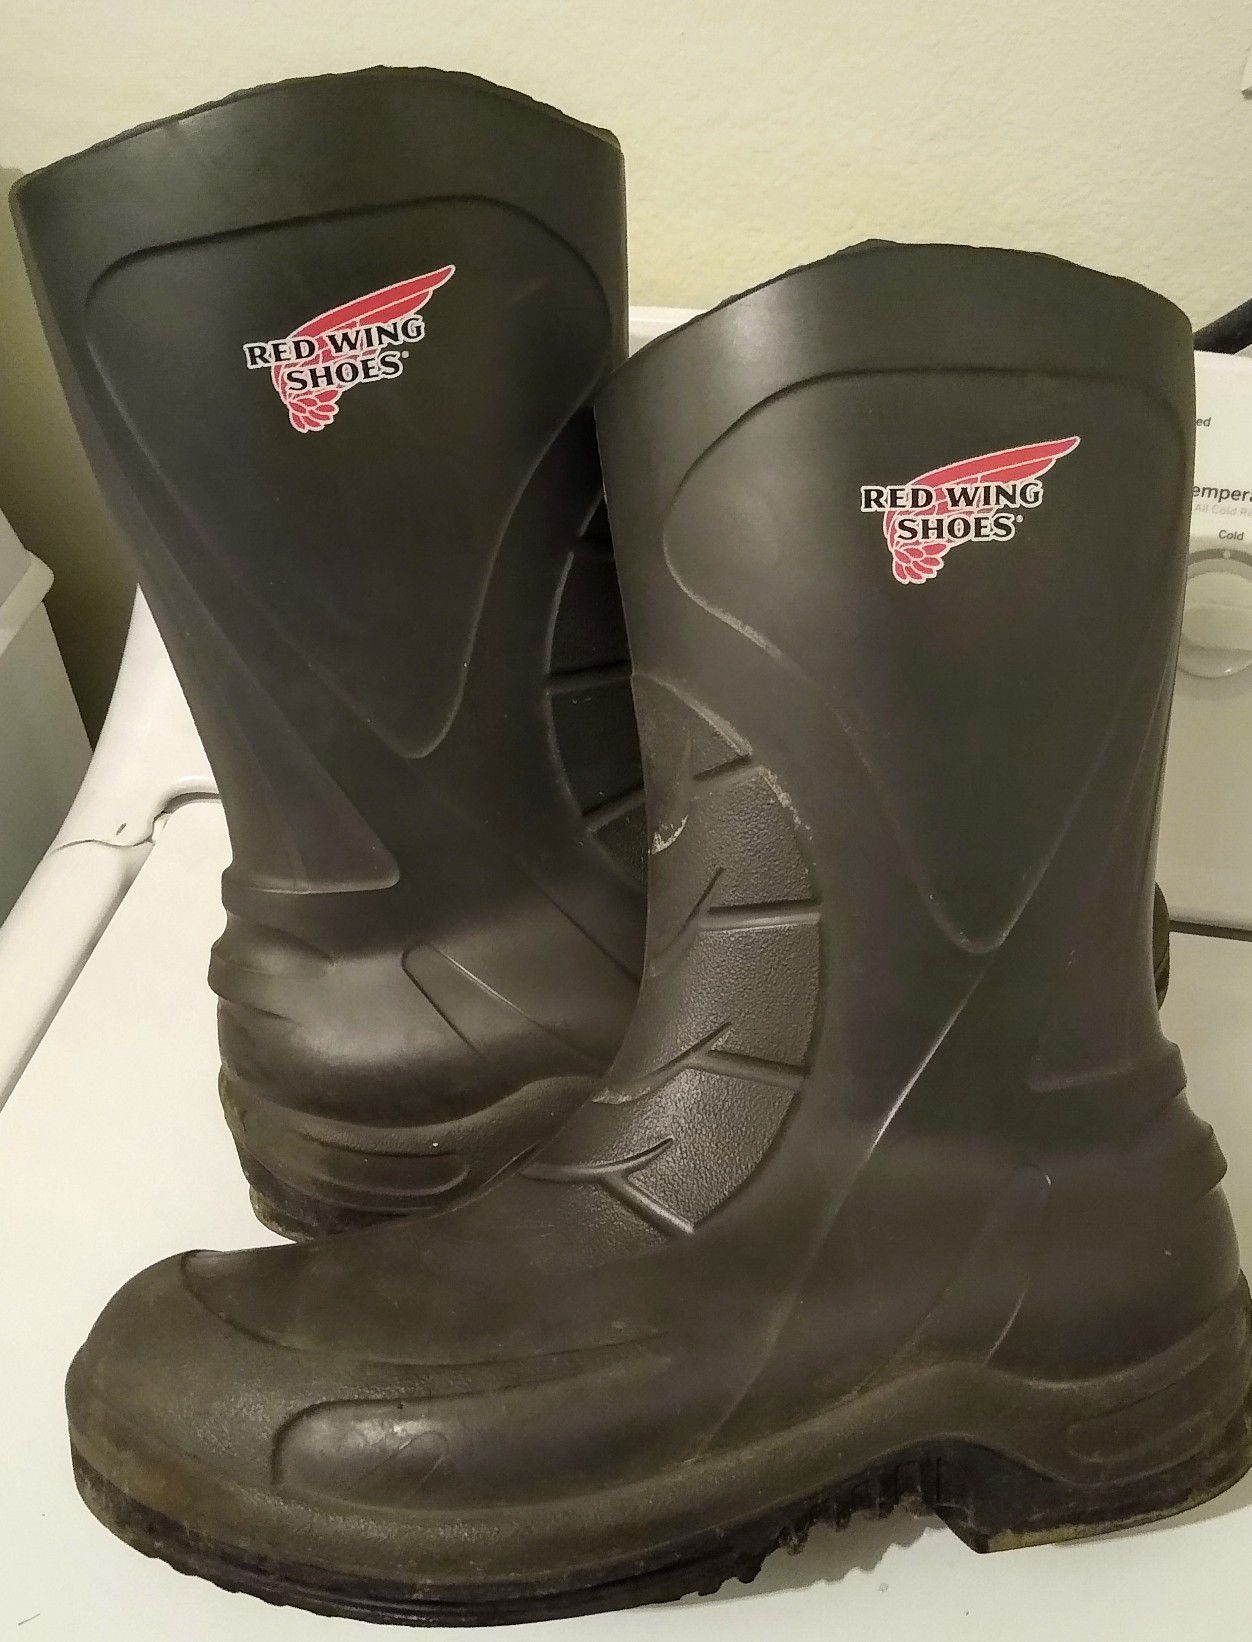 RED WING RUBBER BOOTS 59001 ASTM F 2413-11 SIZE  10.5